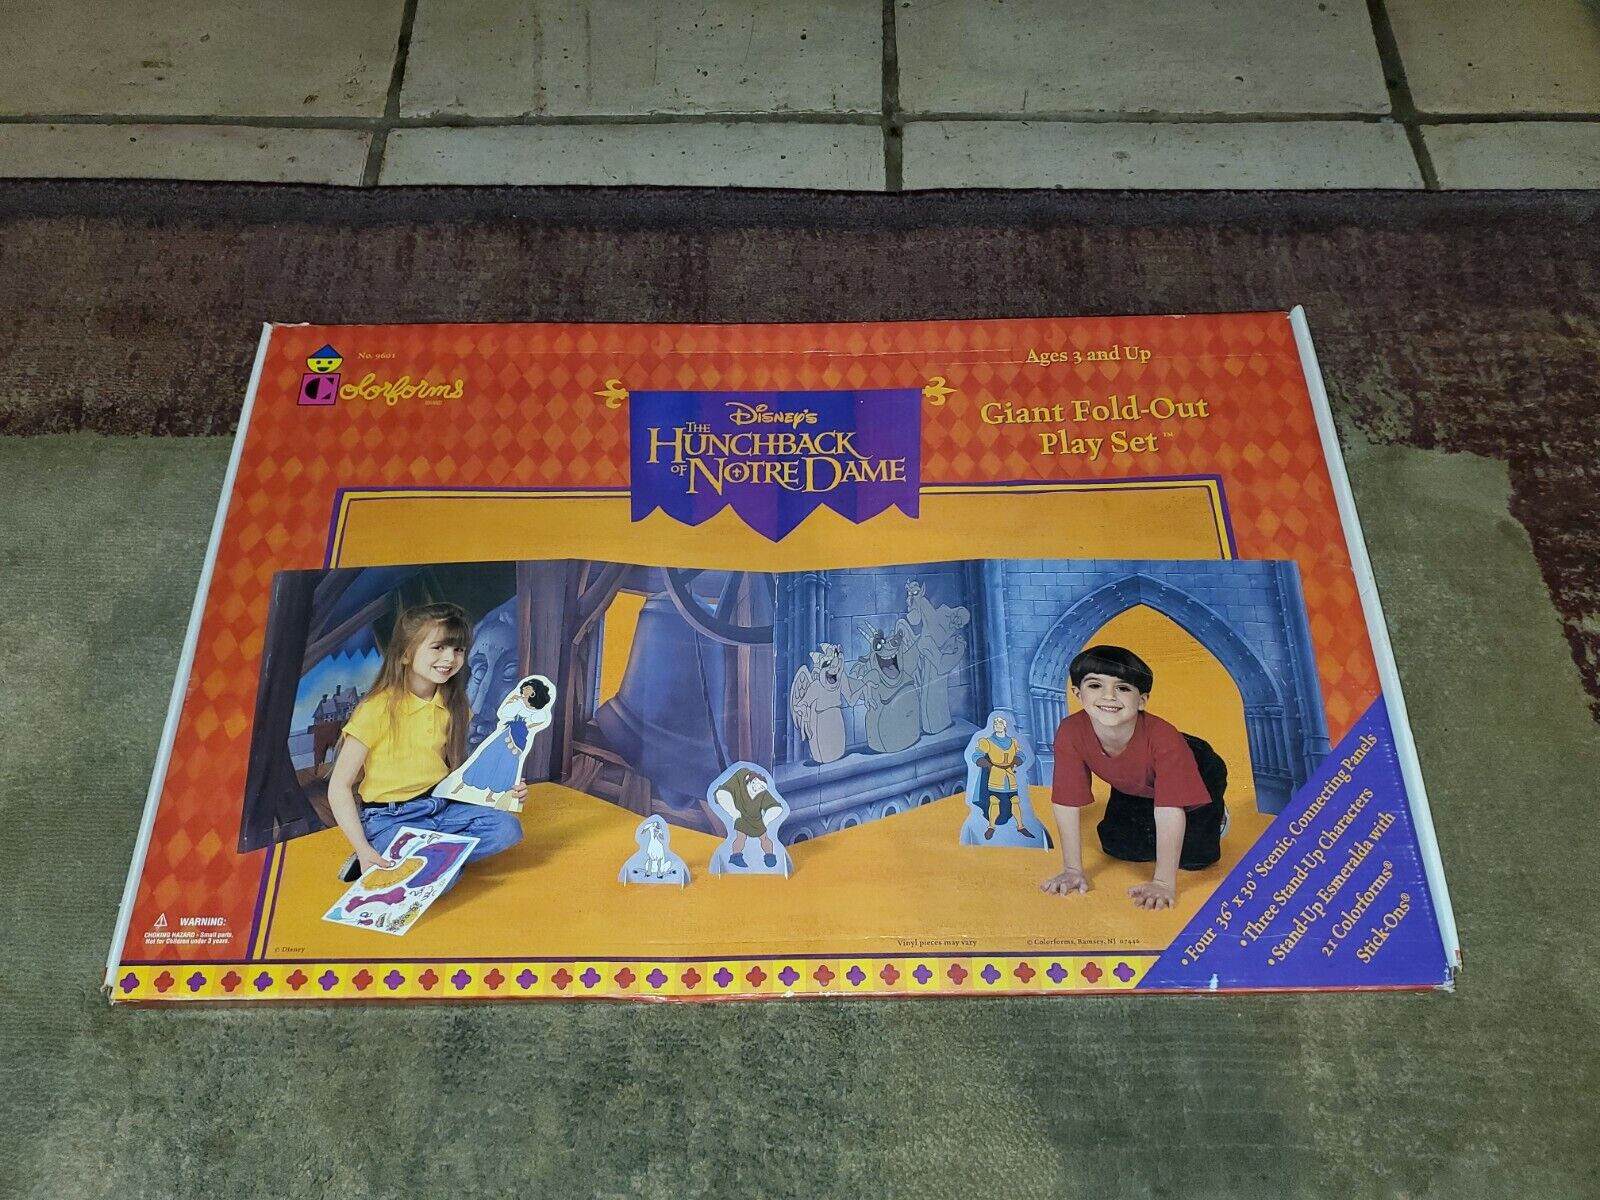 The Hunchback of Notre Dame, Colorforms Playset, Deluxe Giant Pl